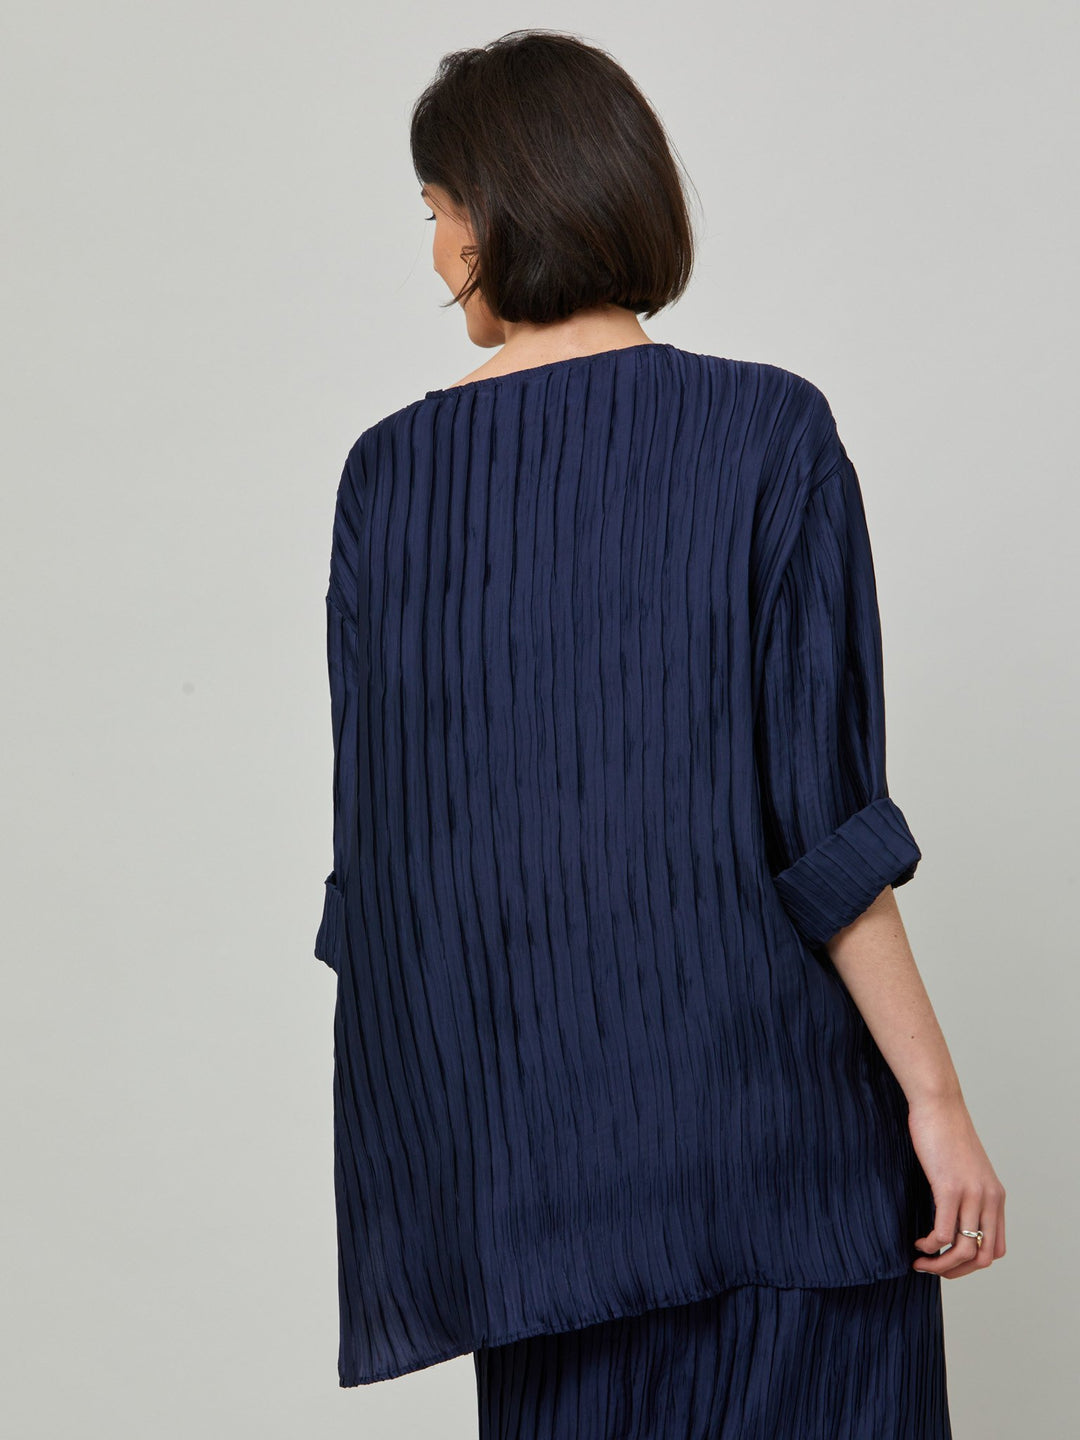 Hallie, elegant tunic in polished navy pleated fabric. A simple wardrobe essential, the perfect foil for the matching Roz navy pleated skirt. Features full-length sleeve, shown here rolled up.